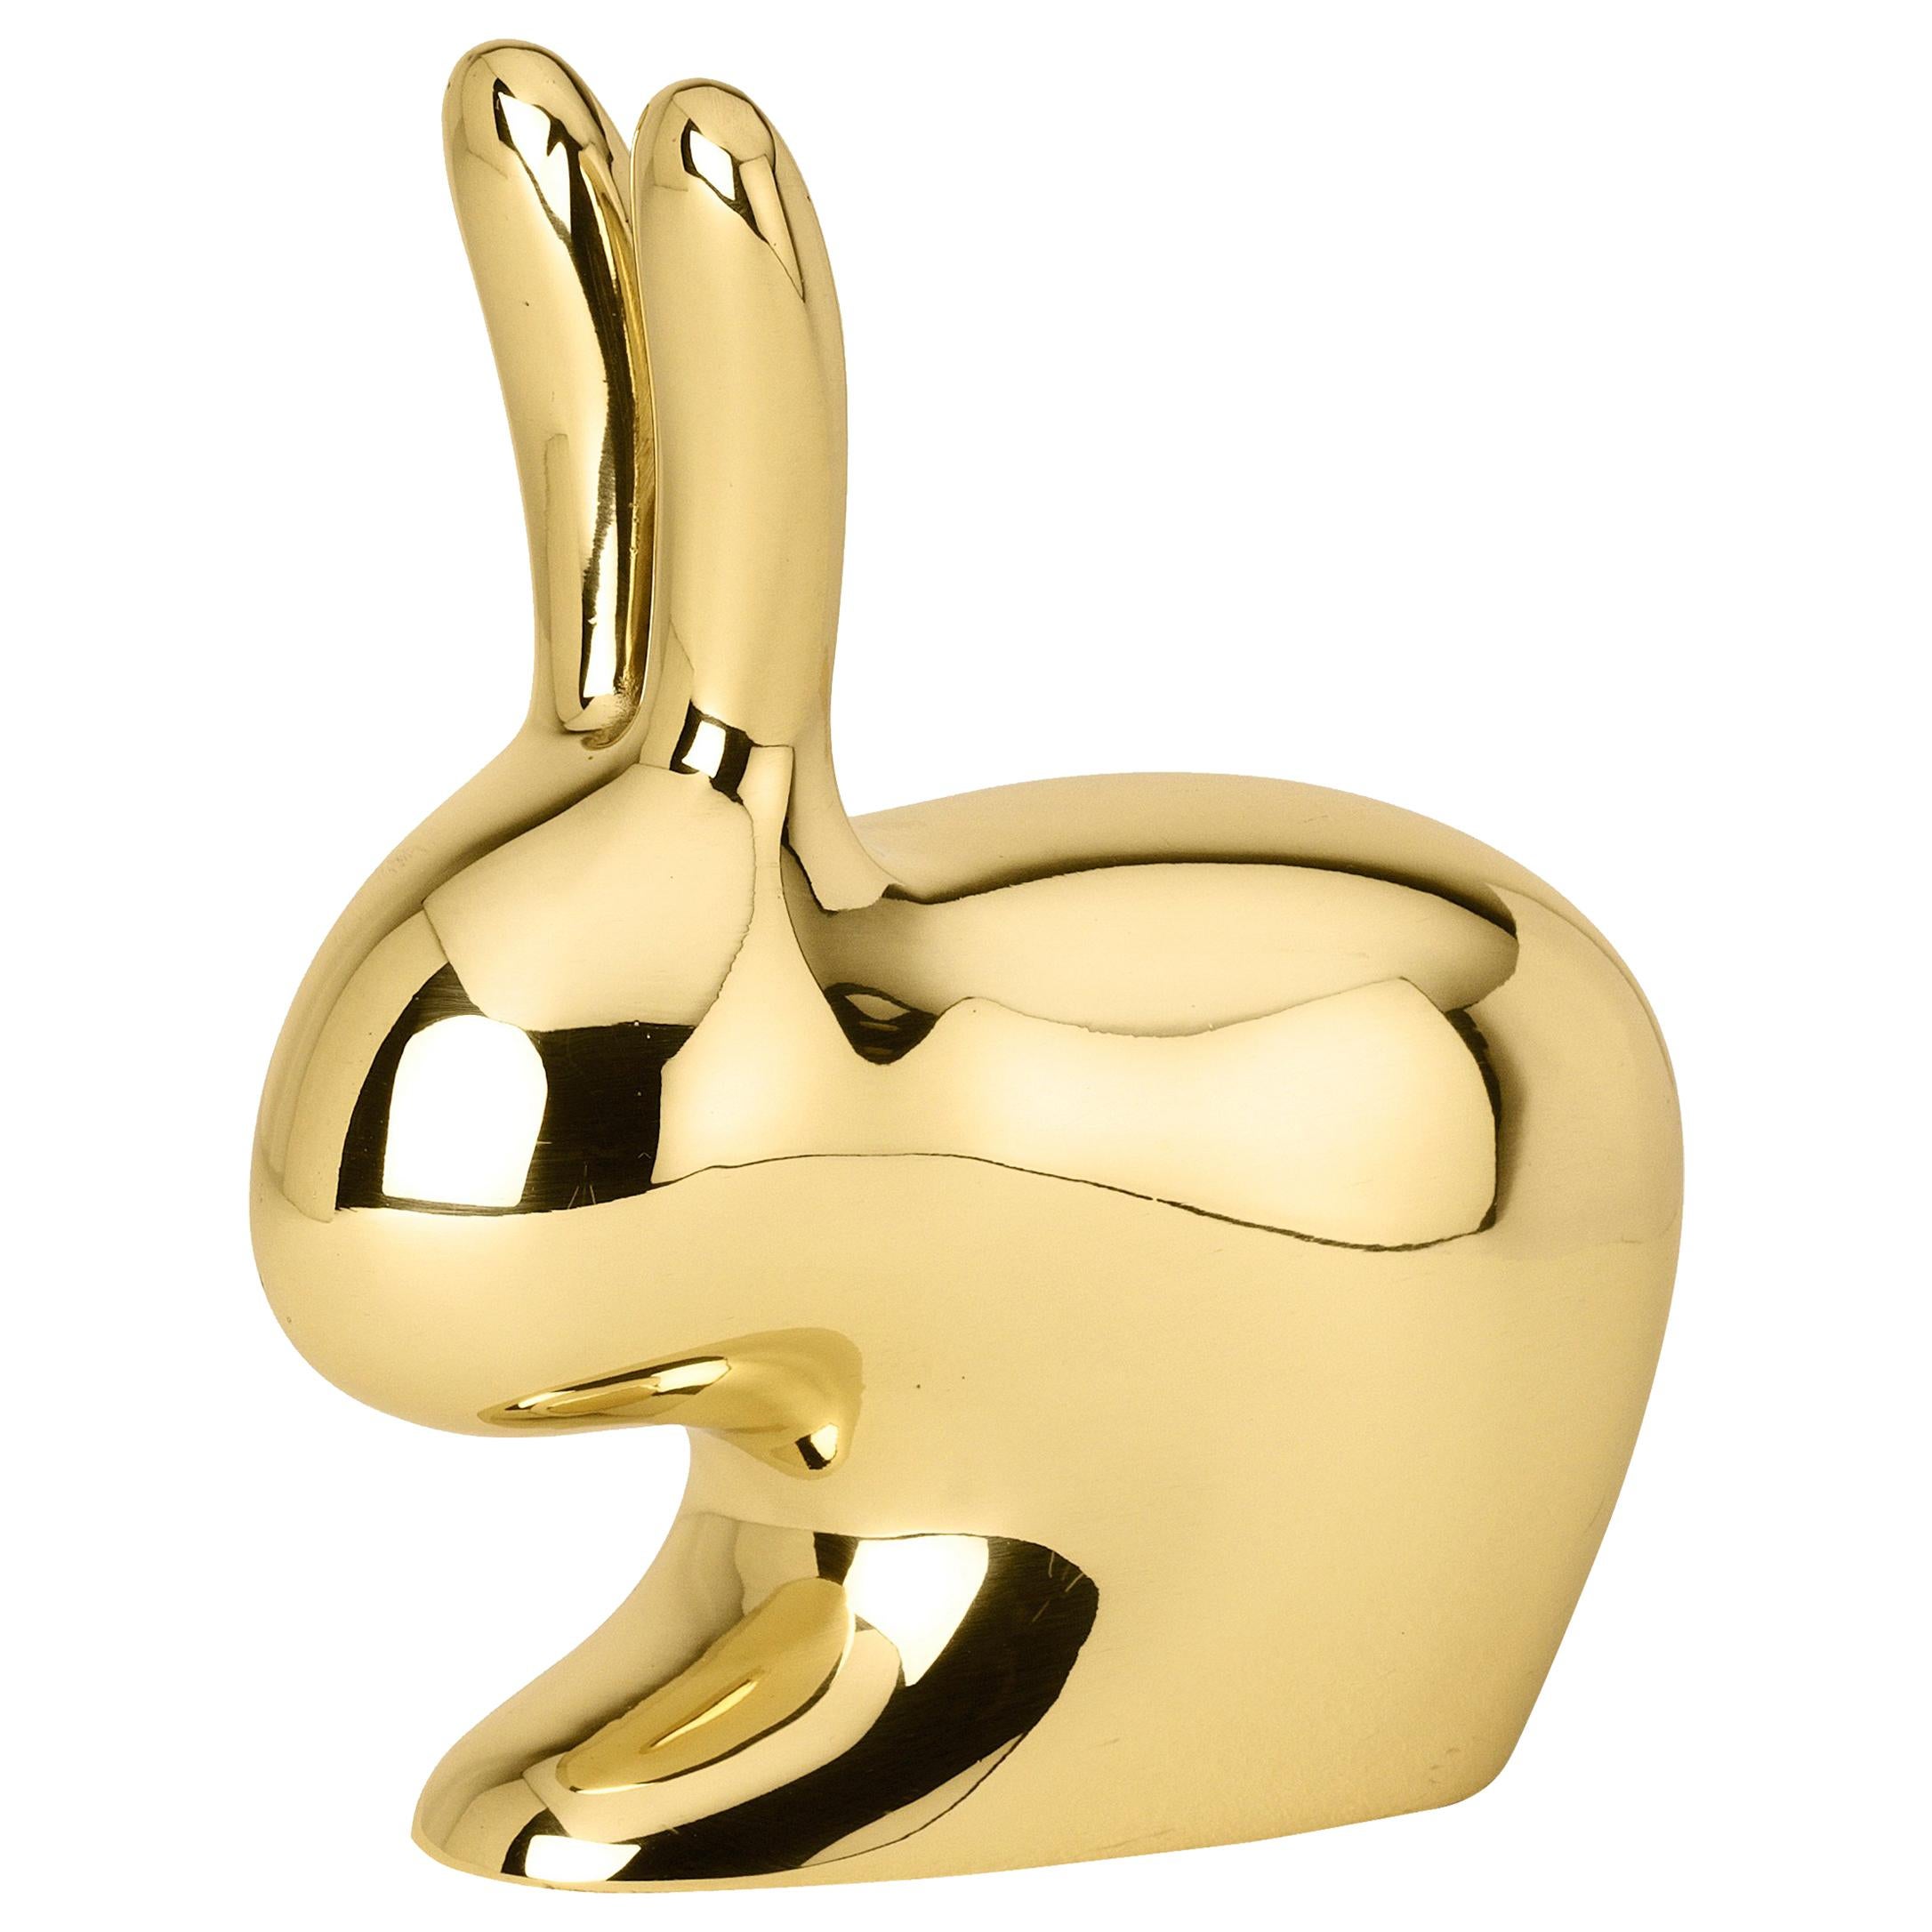 Ghidini 1961 Medium Rabbit in Polished Brass by Stefano Giovannoni For Sale